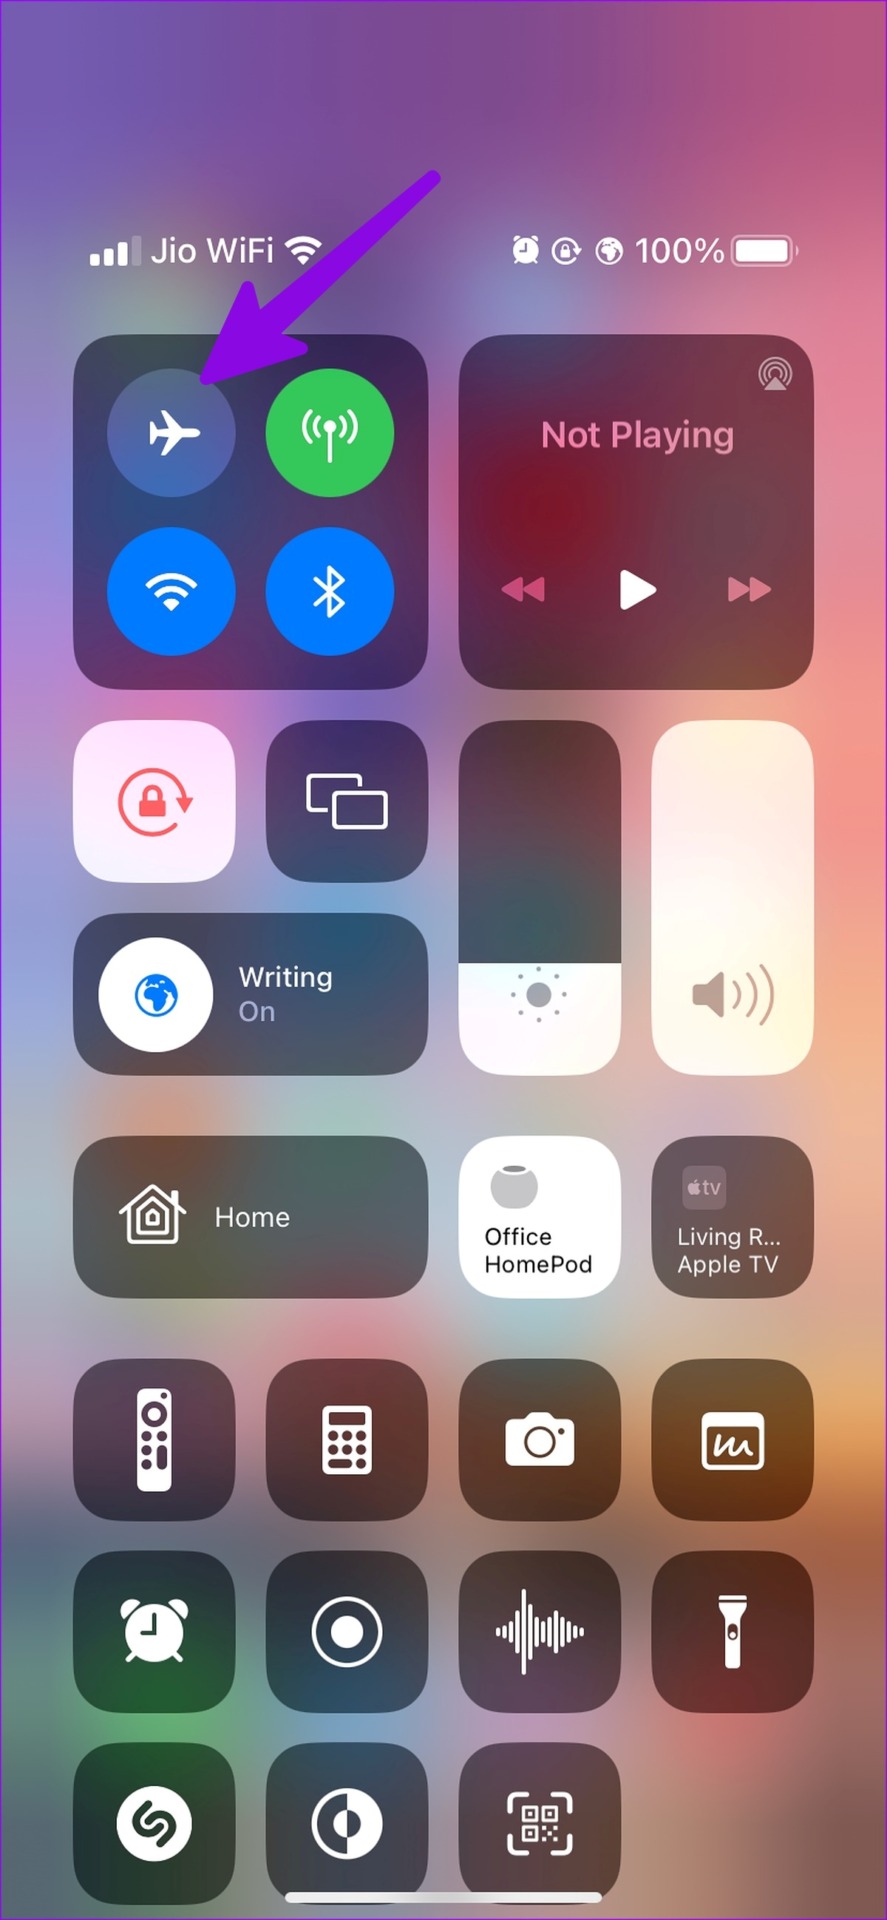 enable airplane mode on iPhone